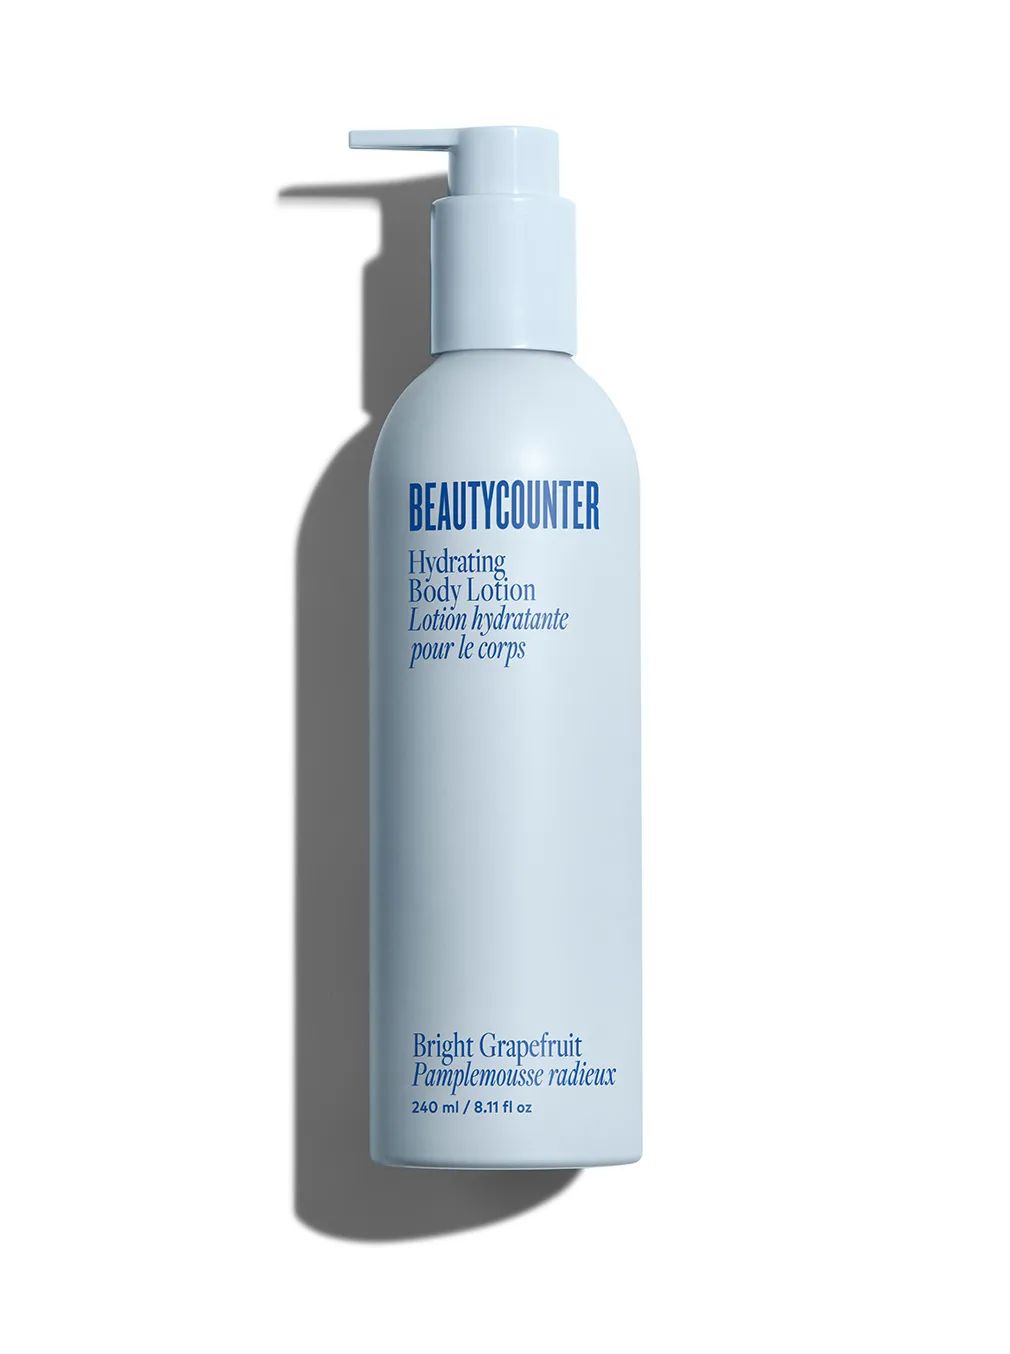 Hydrating Body Lotion in Bright Grapefruit - Beautycounter - Skin Care, Makeup, Bath and Body and... | Beautycounter.com